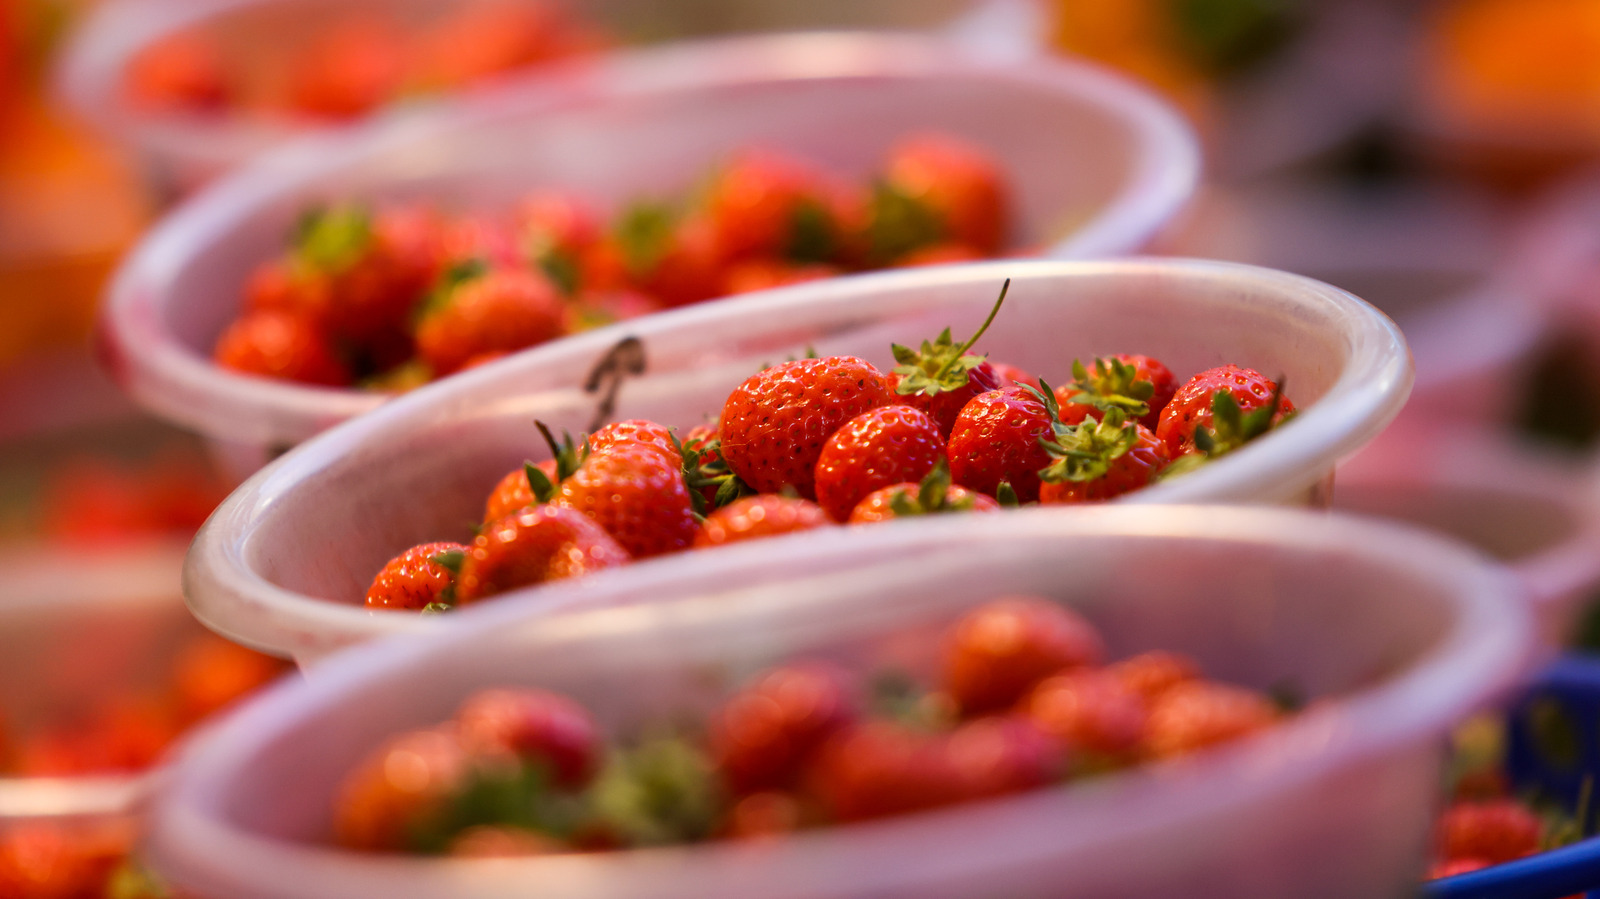 Why There's Going To Be A Strawberry Shortage In 2022